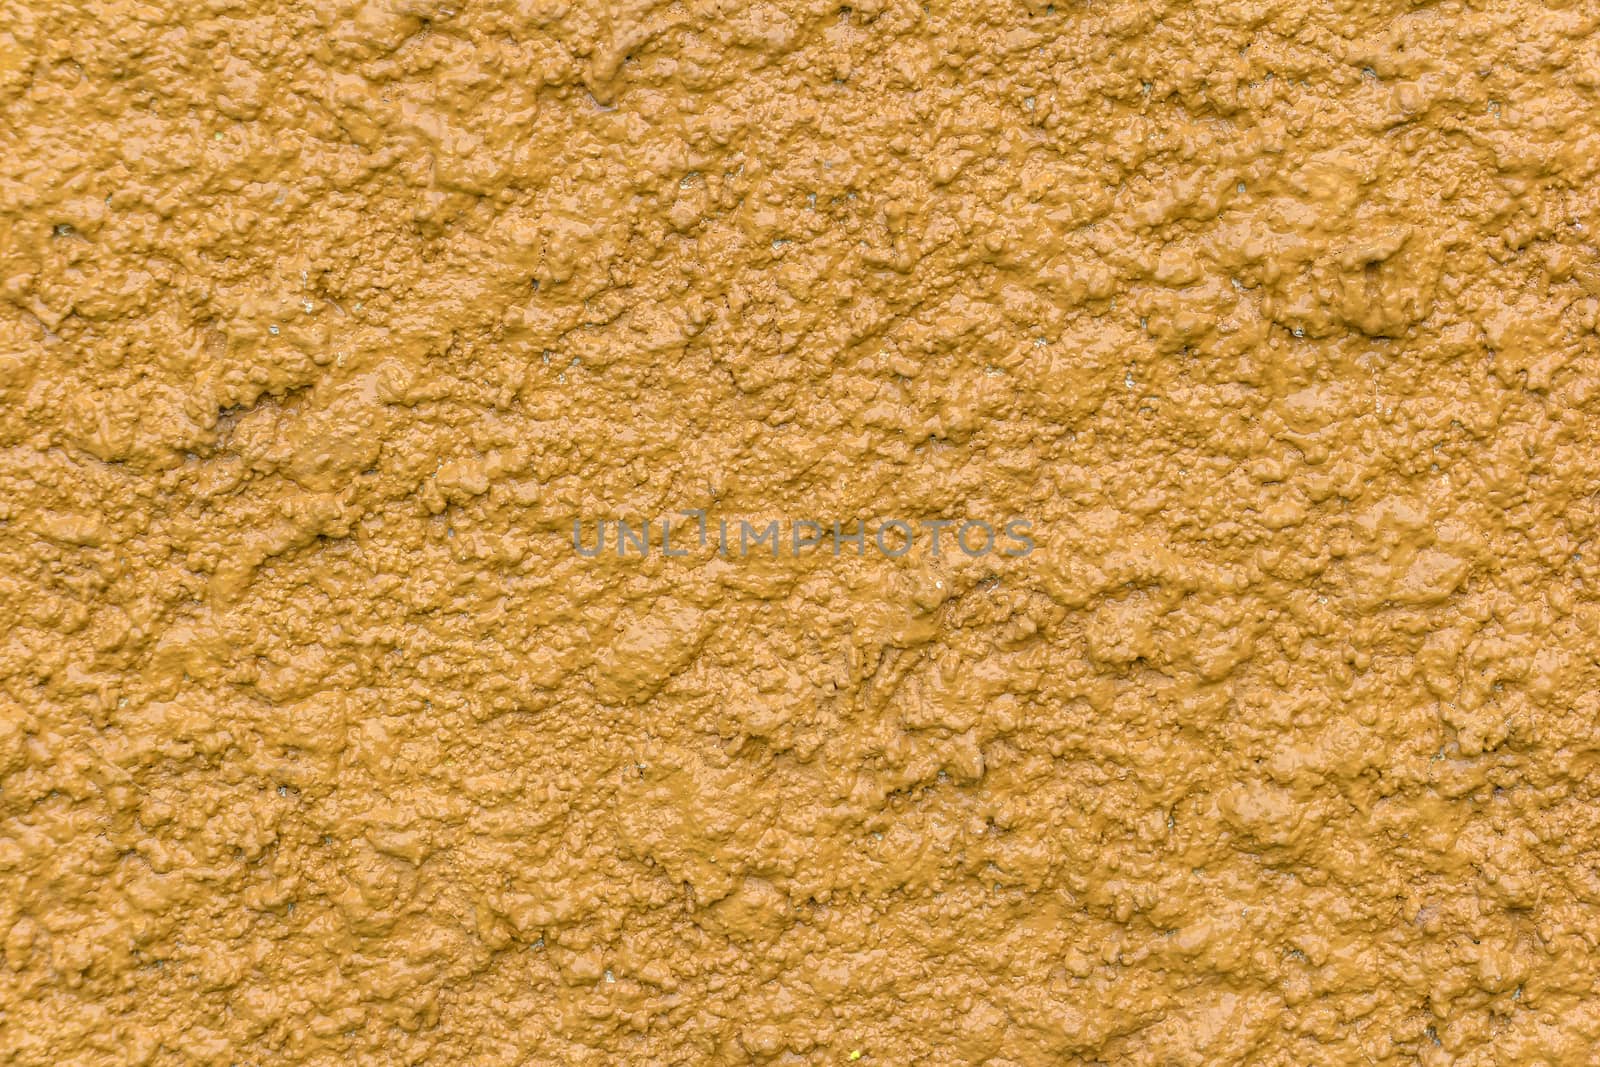 Yellow bump plaster wall coating with oil paint texture by chingraph